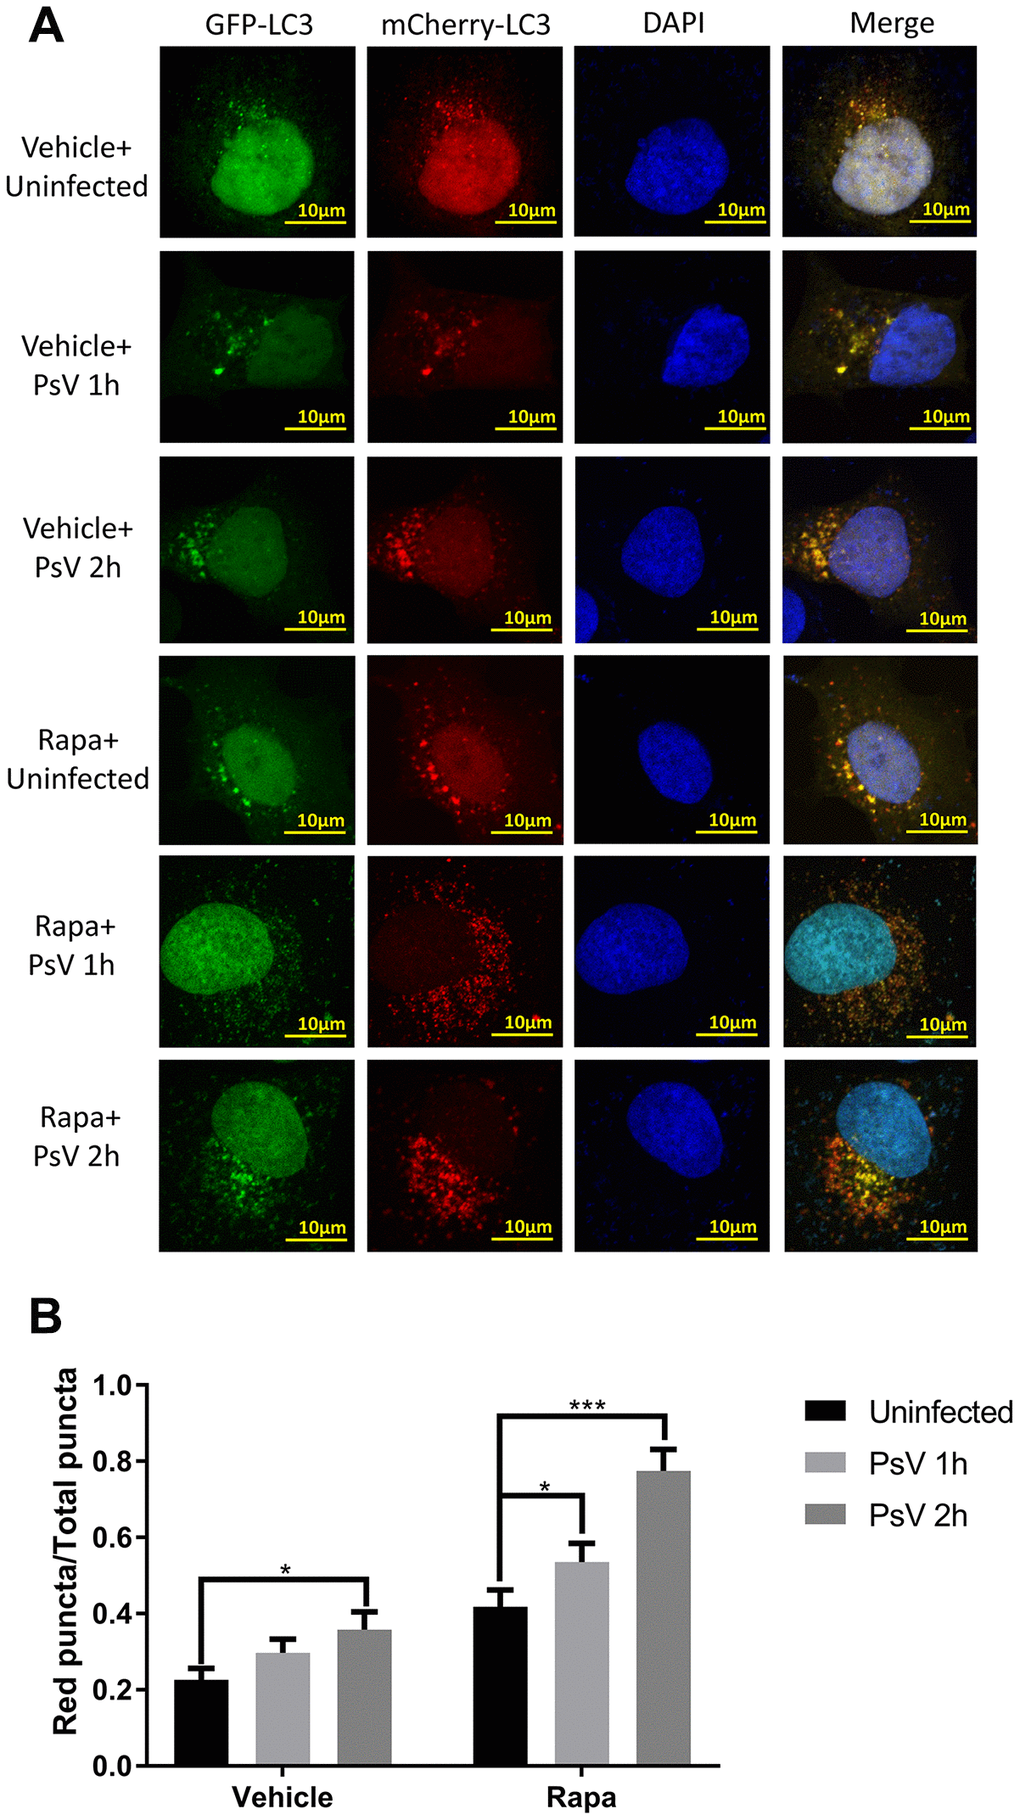 Autolysosome formation is induced by HPV11 PsVs upon entry of NHEKs and enhanced by rapamycin. (A) Confocal microscopy analysis of HPV11 PsV-infected NHEKs transfected with the mCherry-GFP-LC3 plasmid. Experiments were performed with or without pre-treatment with the canonical autophagy activator rapamycin. (B) Quantification of the ratio of red puncta (autolysosomes) to all puncta (autophagosomes plus autolysosomes). The graph represents the mean and standard deviation from three biological independent repeats, and at least 100 cells were analyzed per repeat. Significant differences were identified by Student’s t test. *, P 